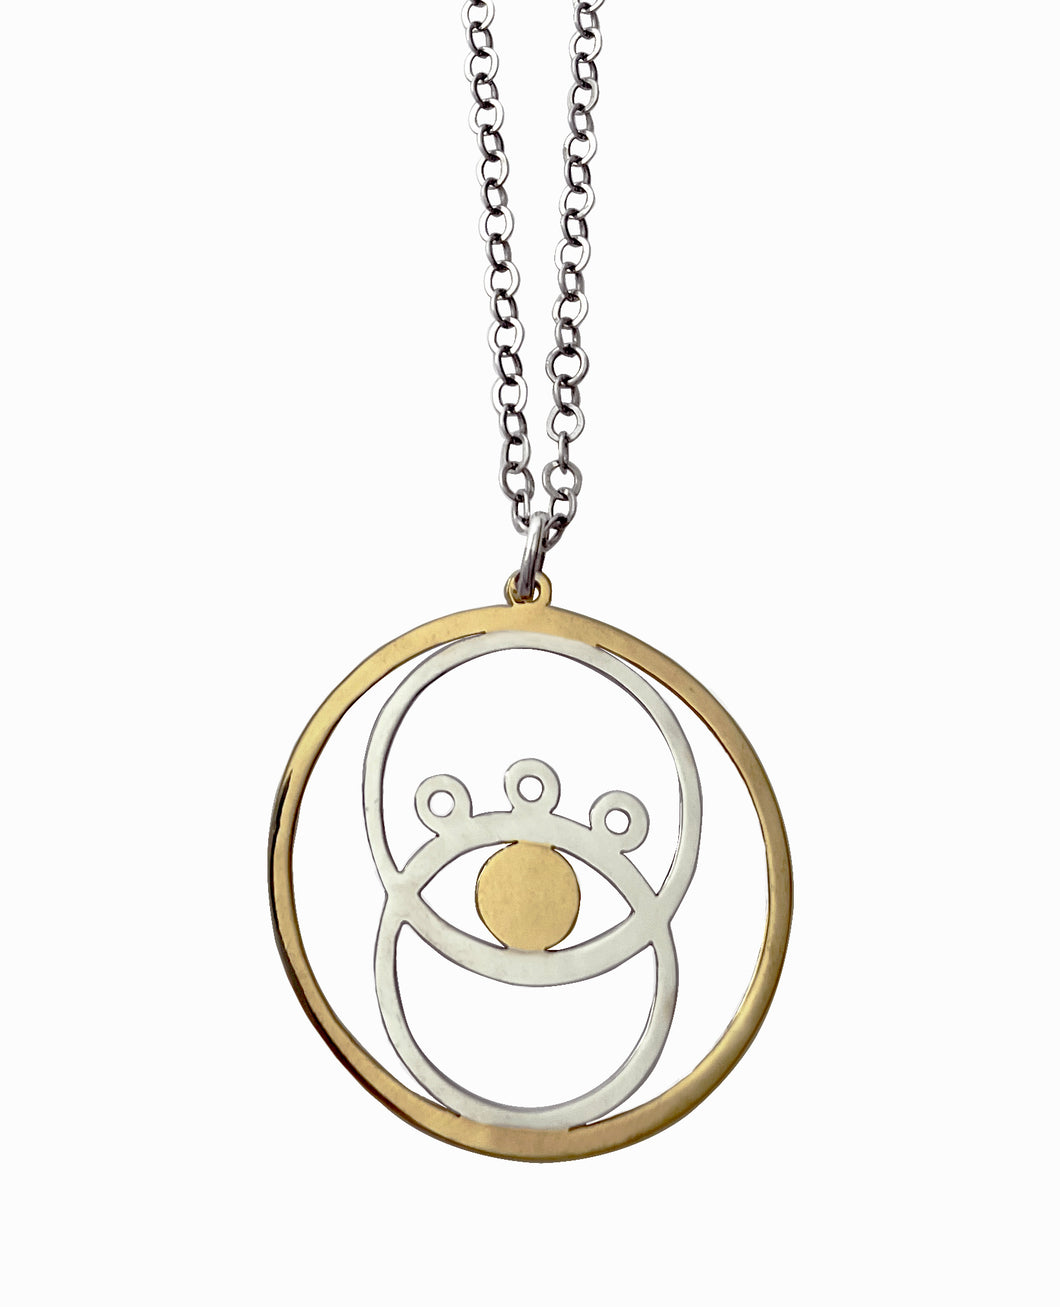 Silver with yellow gold plated inner circle silver necklace